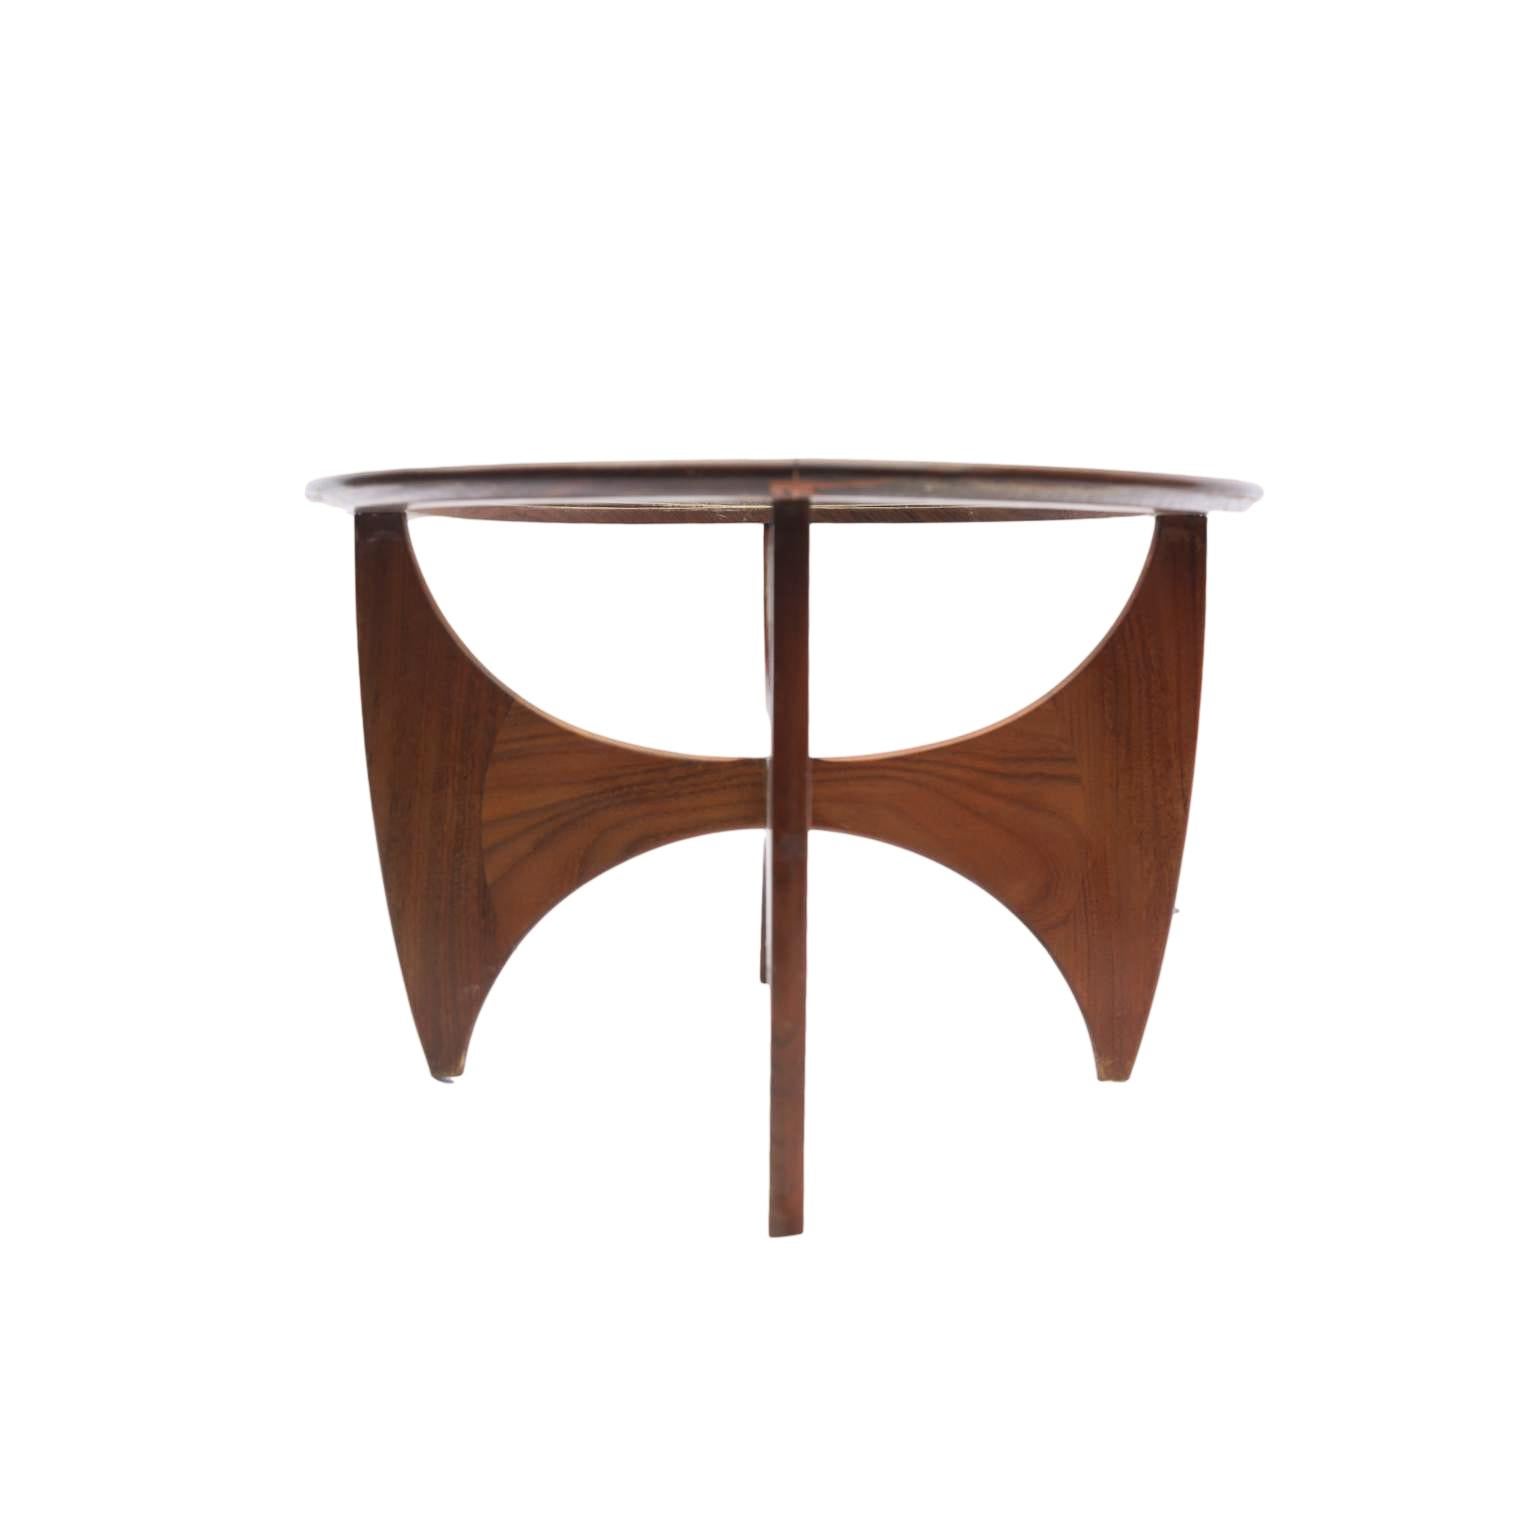 Hand-Crafted Mid-Century Modern G-Plan 'Astro' Oval Coffee Table, Teak, circa 1960